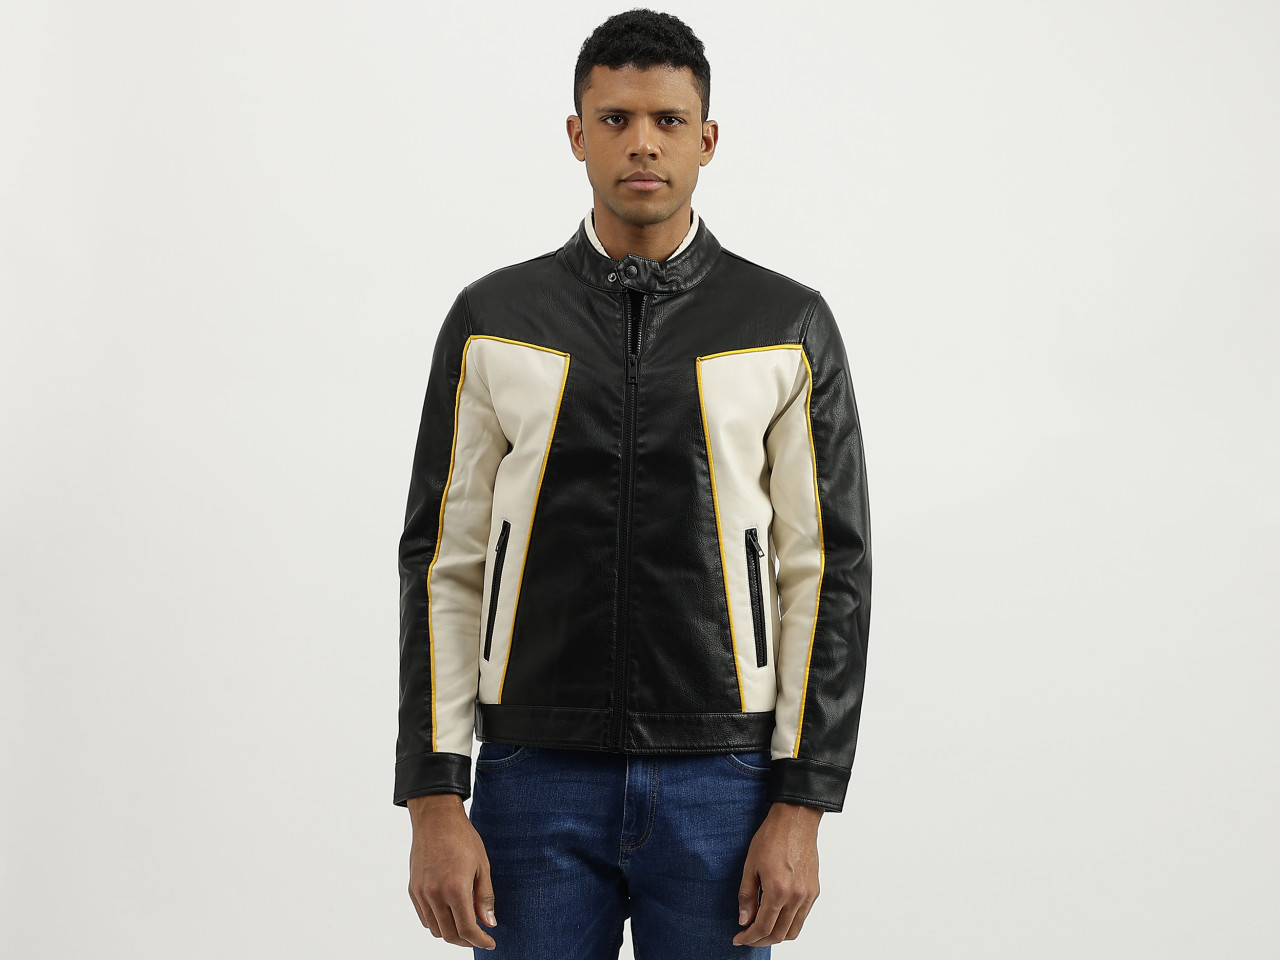 United Colors of Benetton Jackets & Coats for Men sale - discounted price |  FASHIOLA INDIA